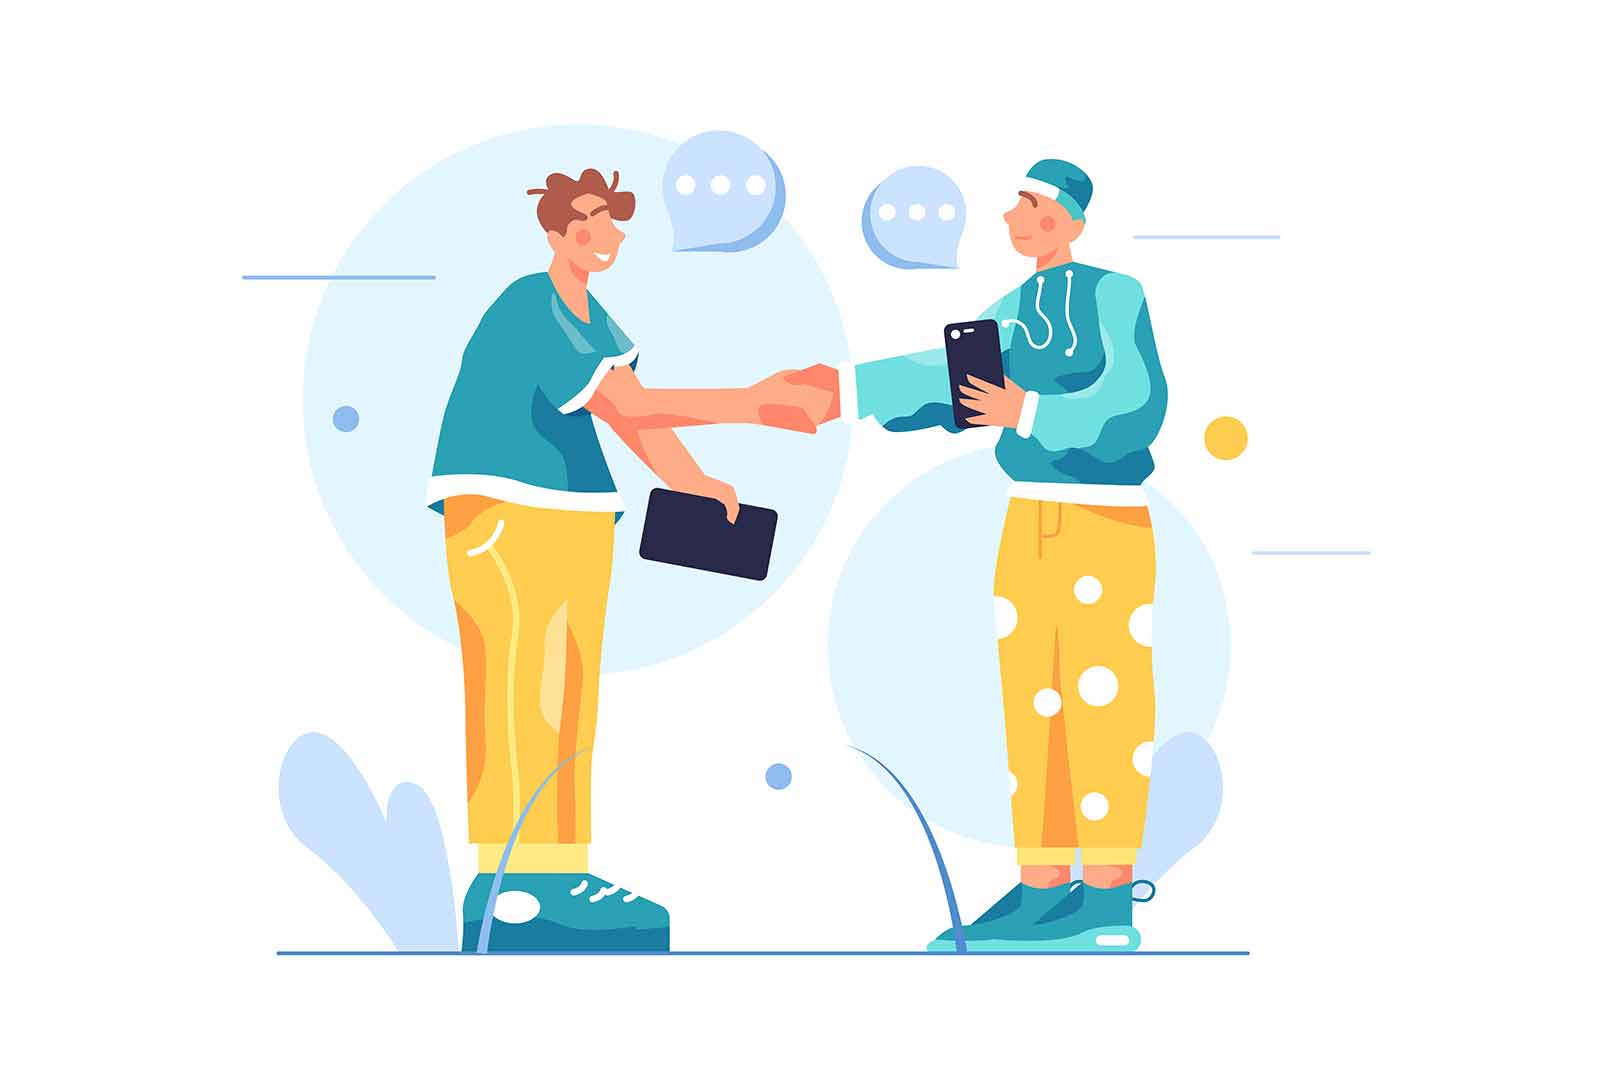 Two men shake hands and make a deal, man with phone in hand isolated on white background, flat vector illustration